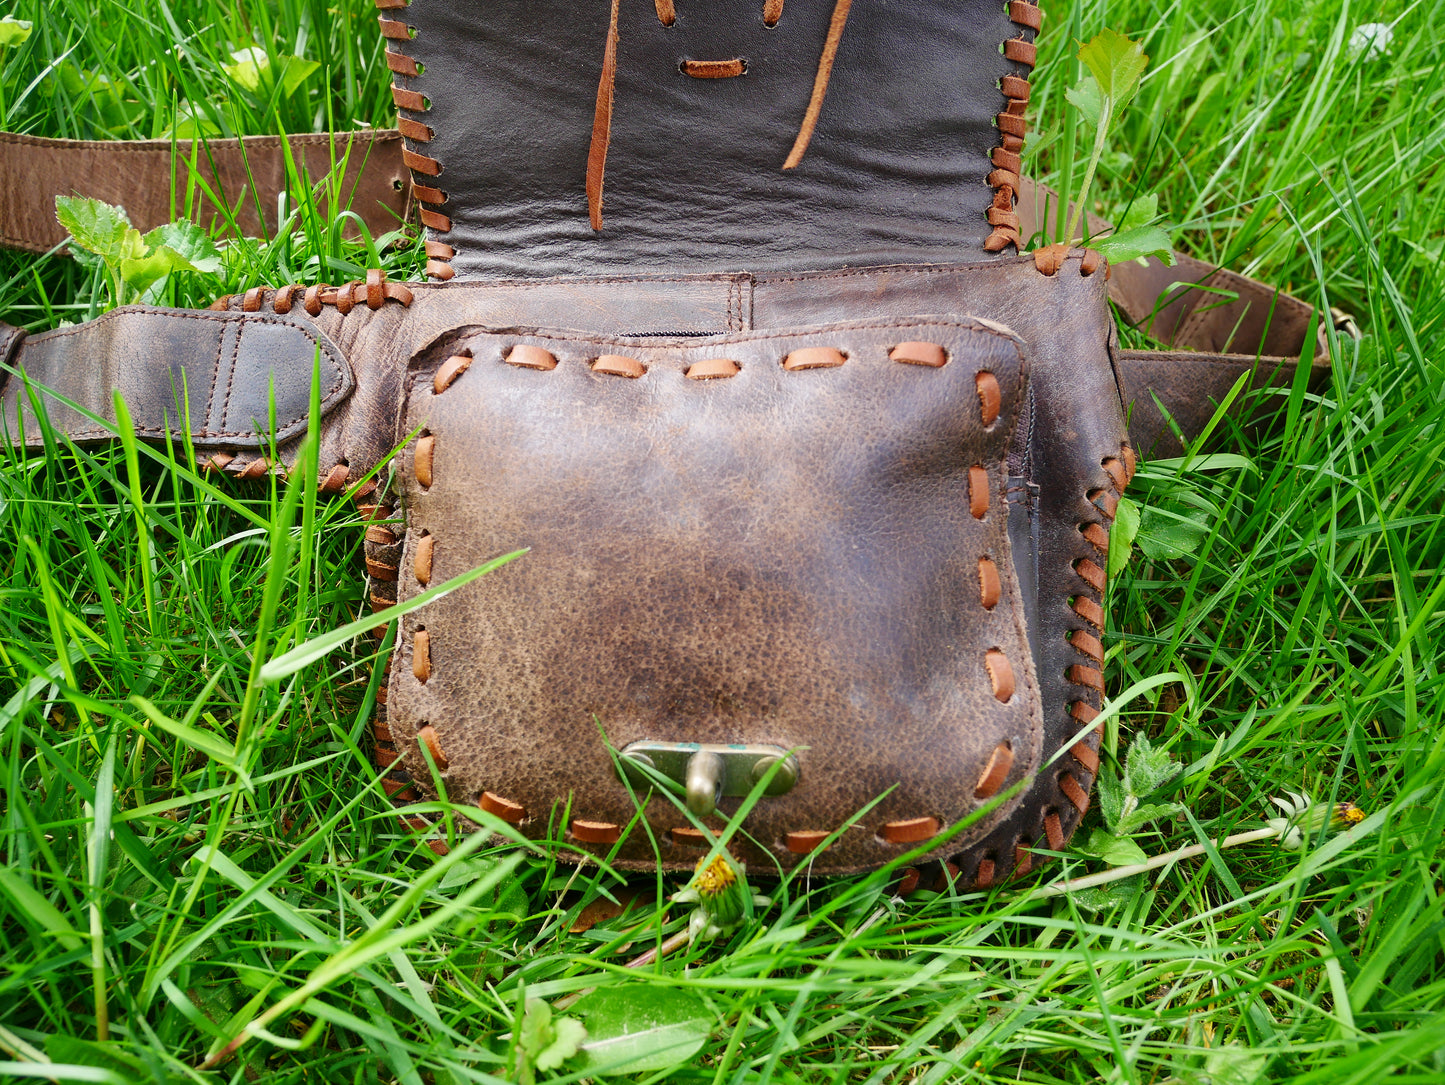 Brown leather belt bag - waist bag with Moonstone stone and hook closure